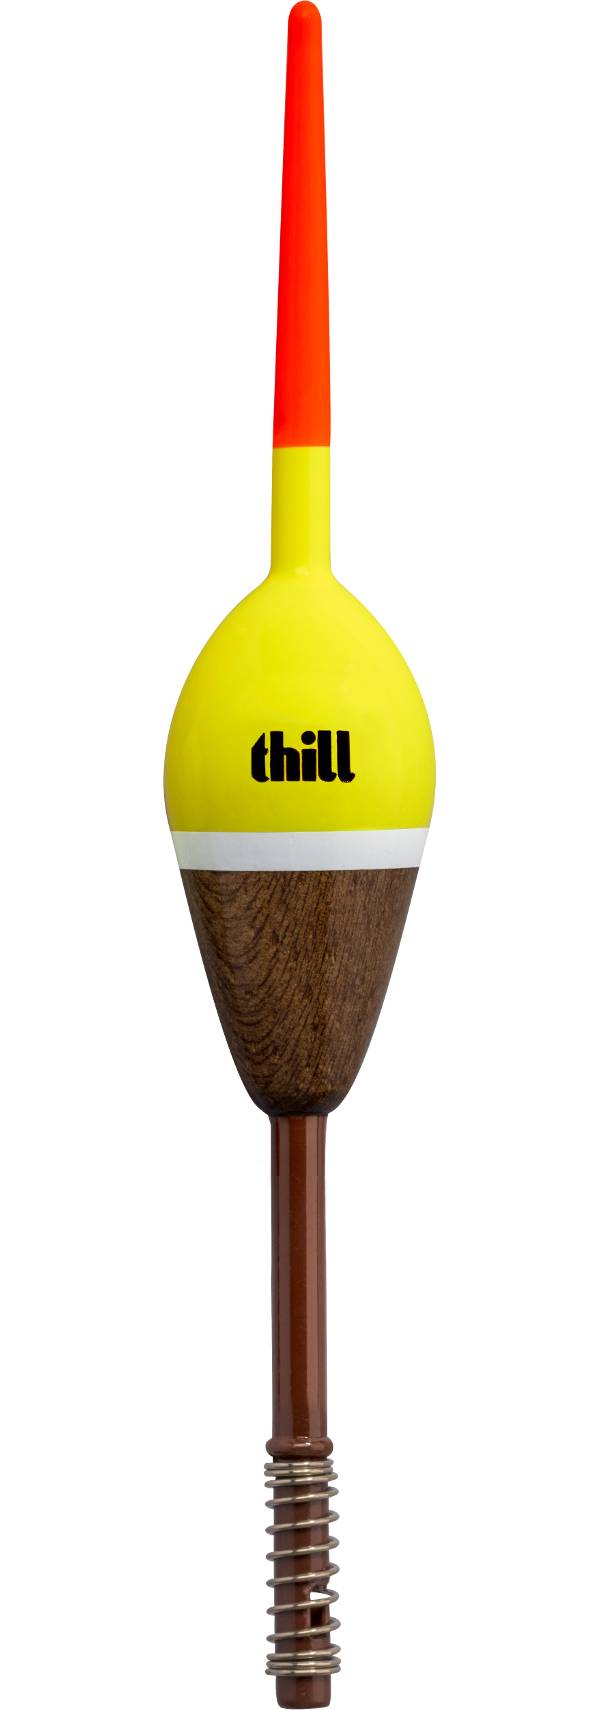 Thill America's Classic Oval Shape Float